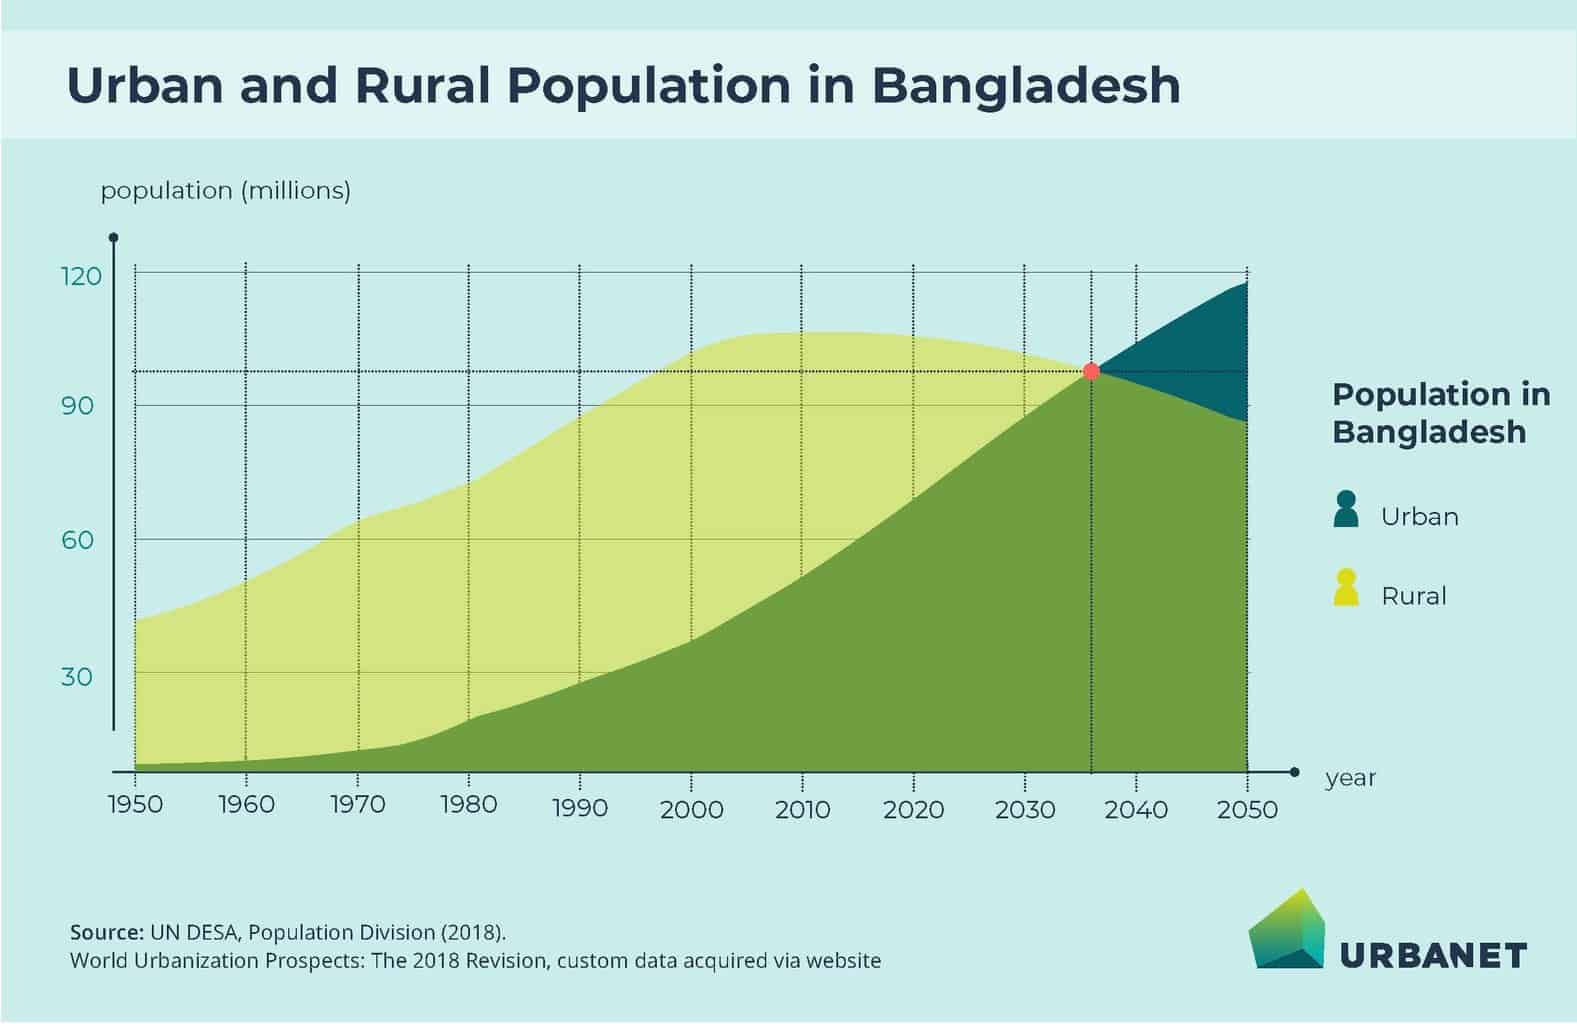 Urbanisation in Bangladesh has picked up over the past decades, and in 2037 the countrie's urban population will outnumber the rural one for the first time. 